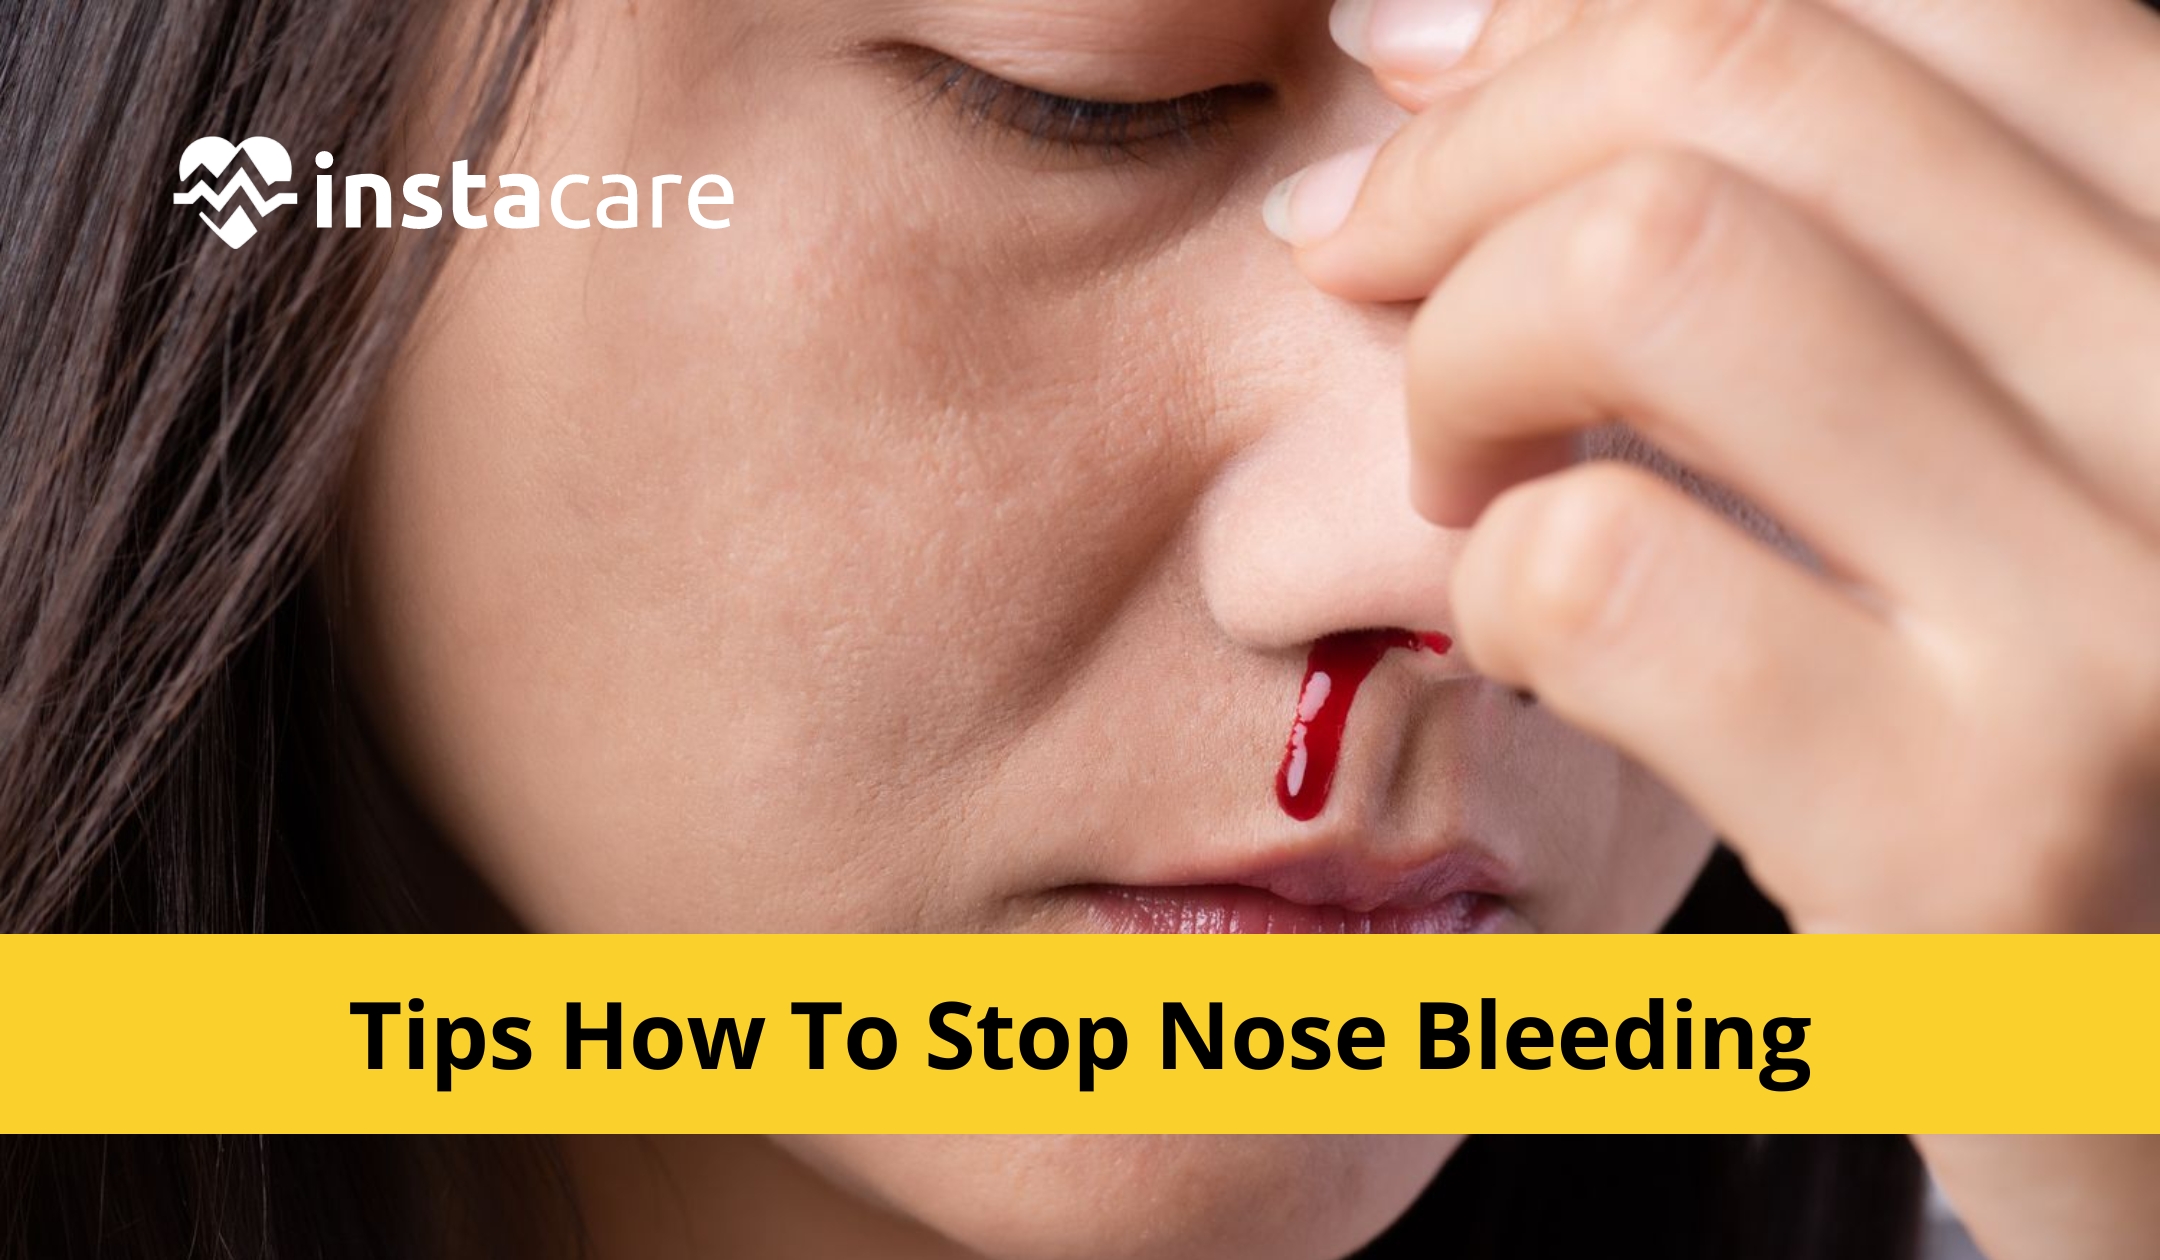 7 Tips How To Stop Nose Bleeding